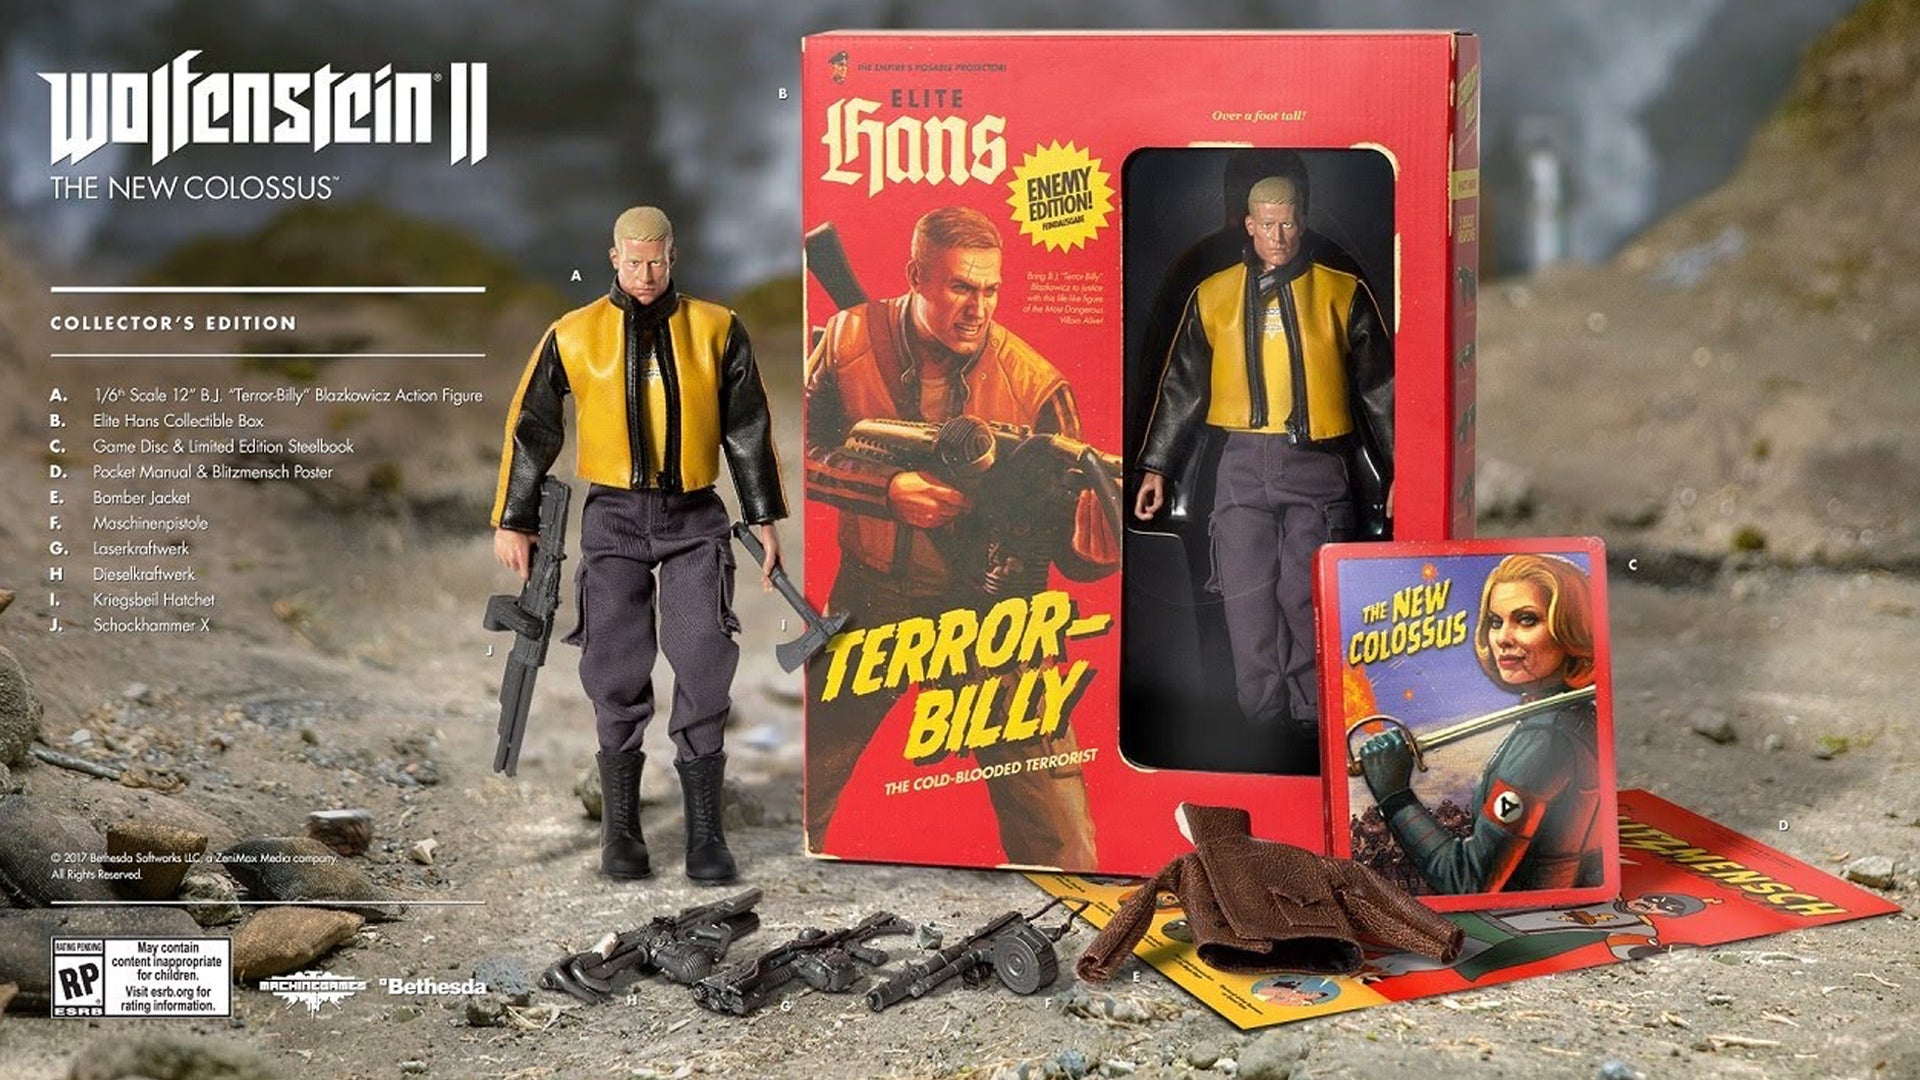 Image for Jelly Deals: Wolfenstein 2's Collector's Edition reduced a week before launch